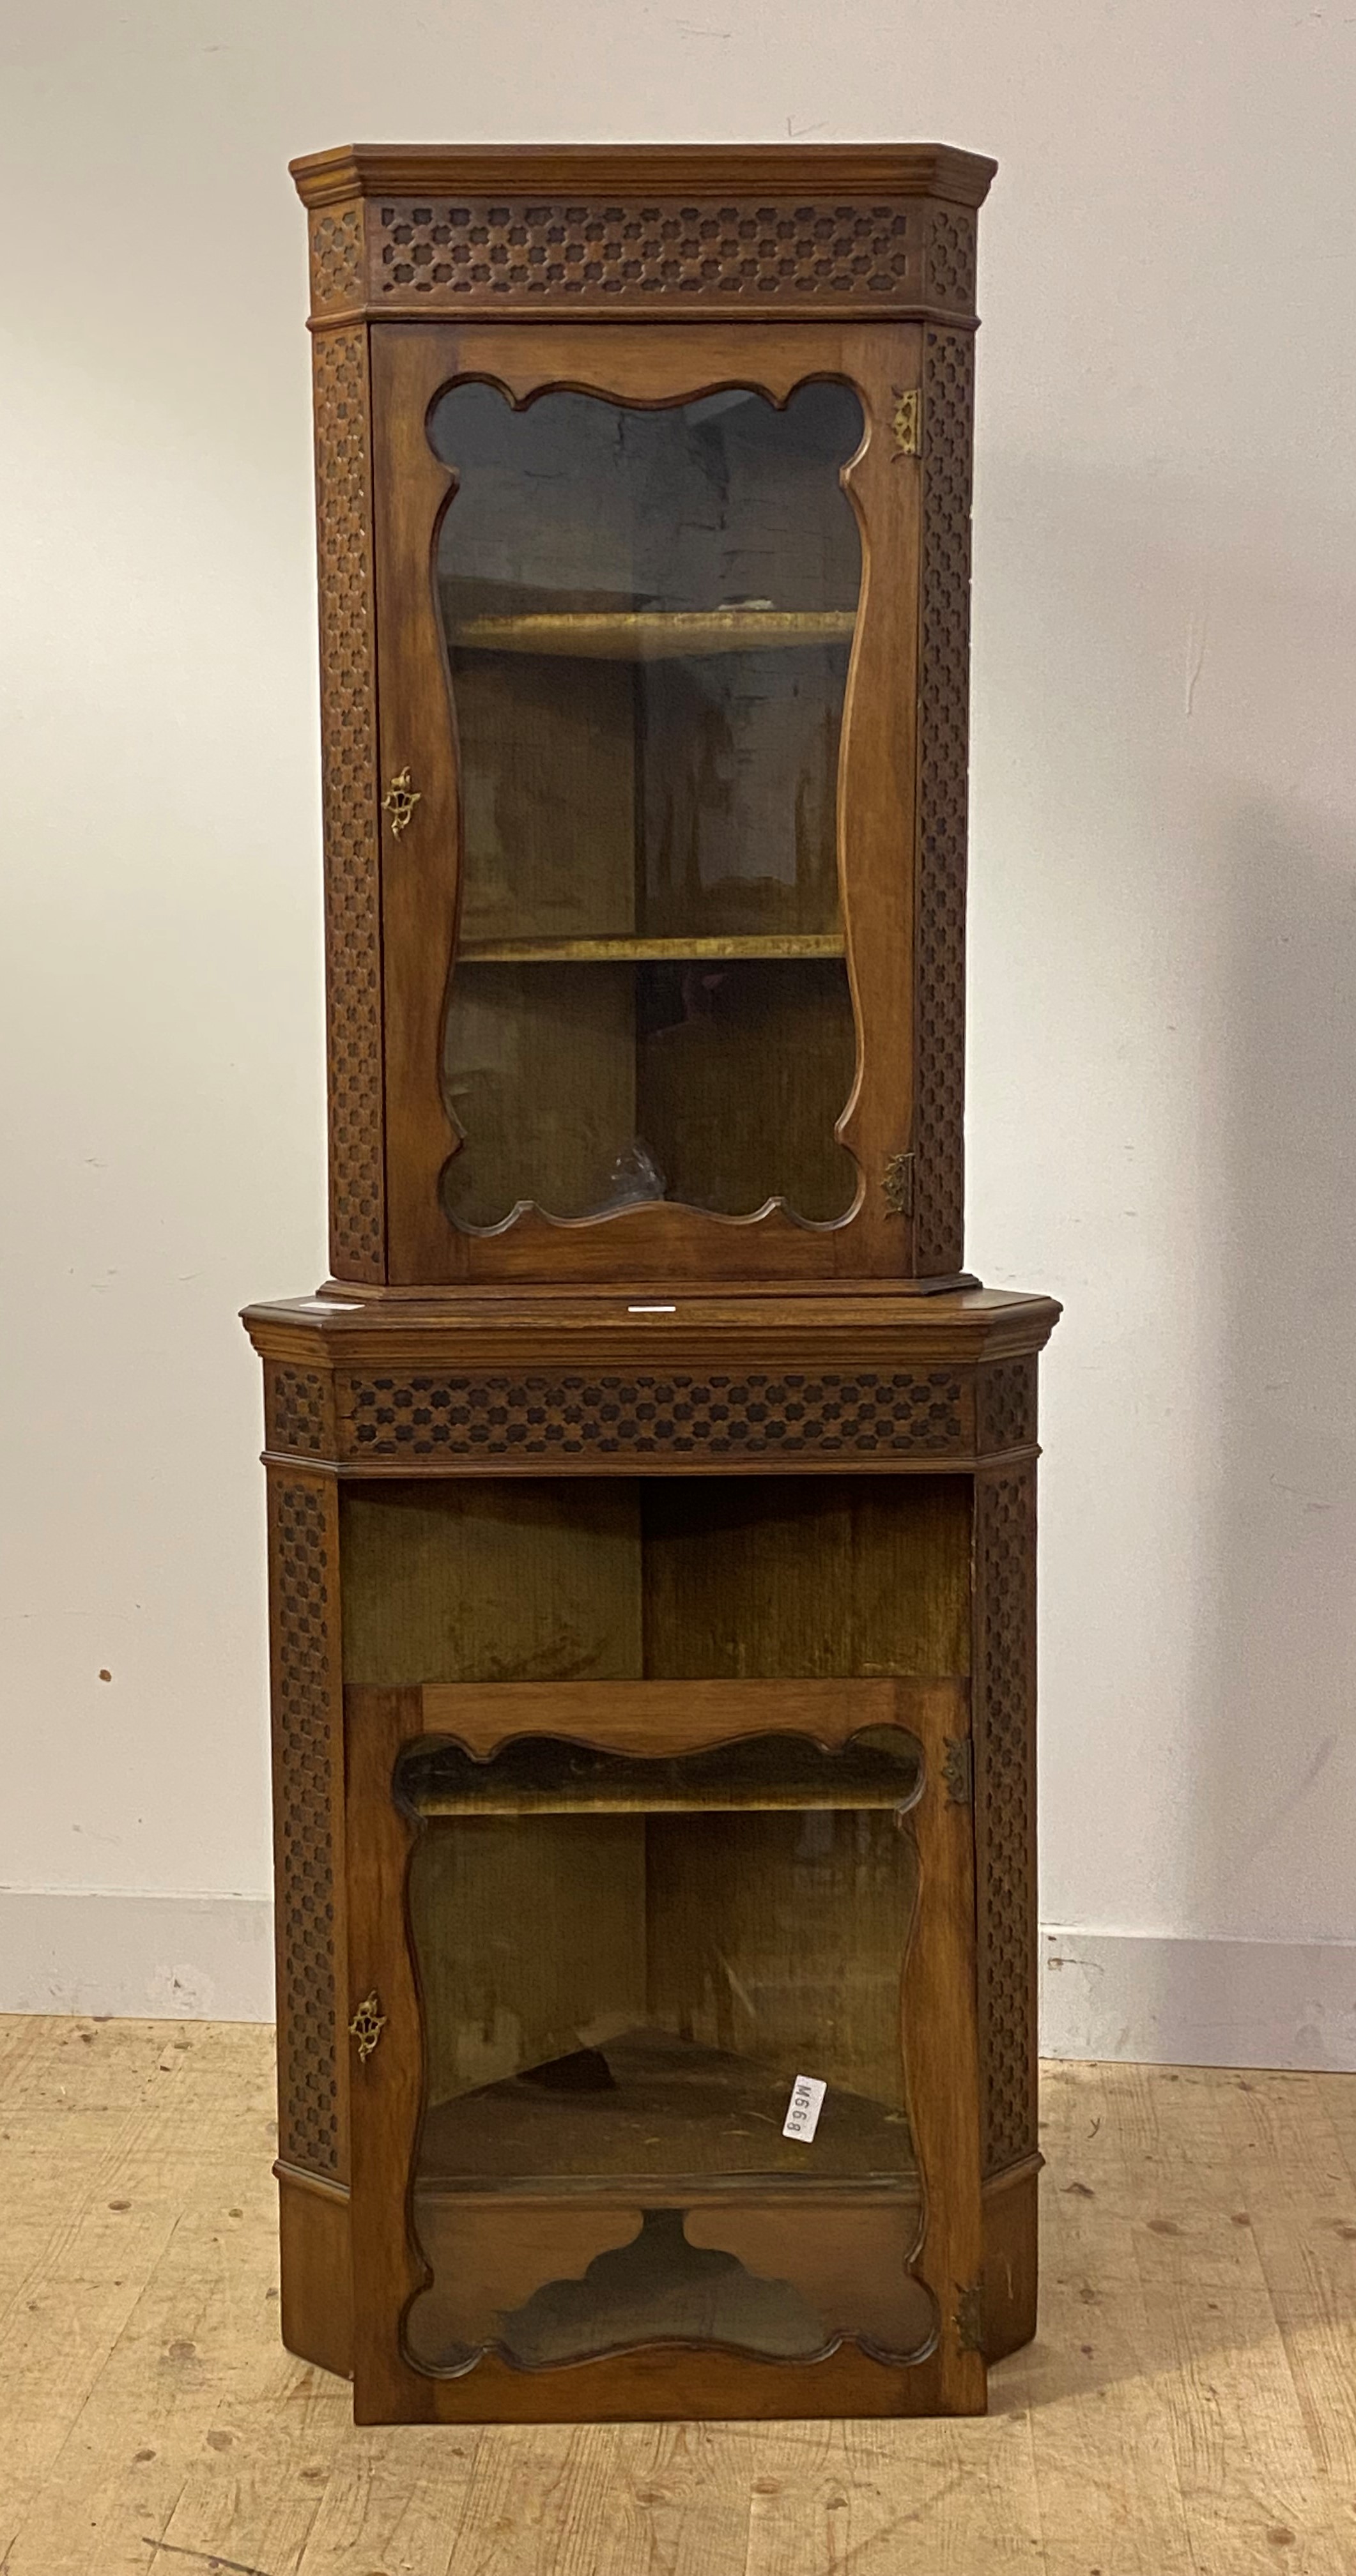 An Early 20th century two part floor standing corner cabinet, two glazed doors framed within blind